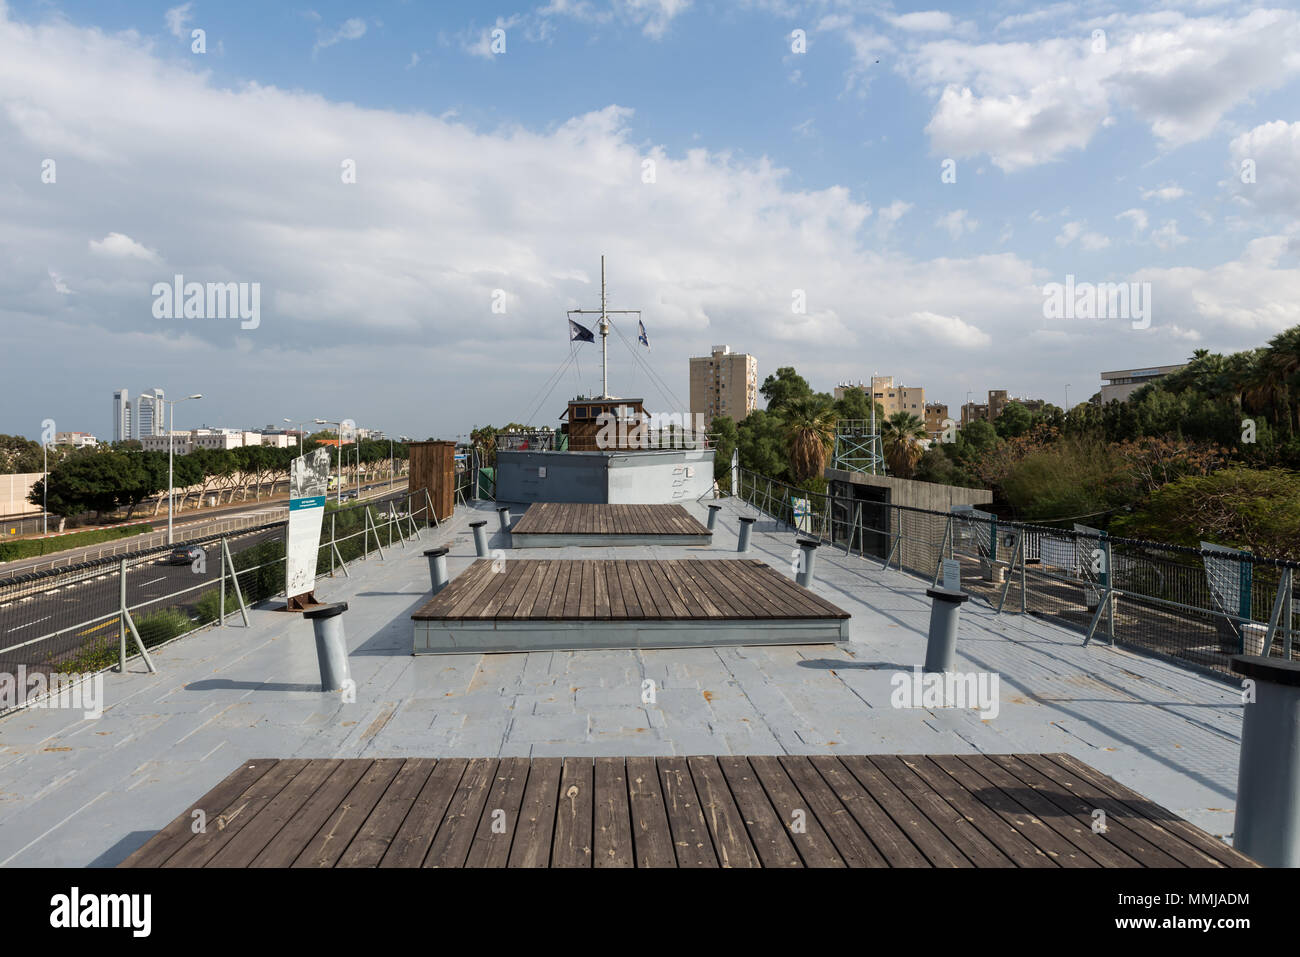 Clandestine Immigration and Naval Museum in Haifa, Israel Stock Photo